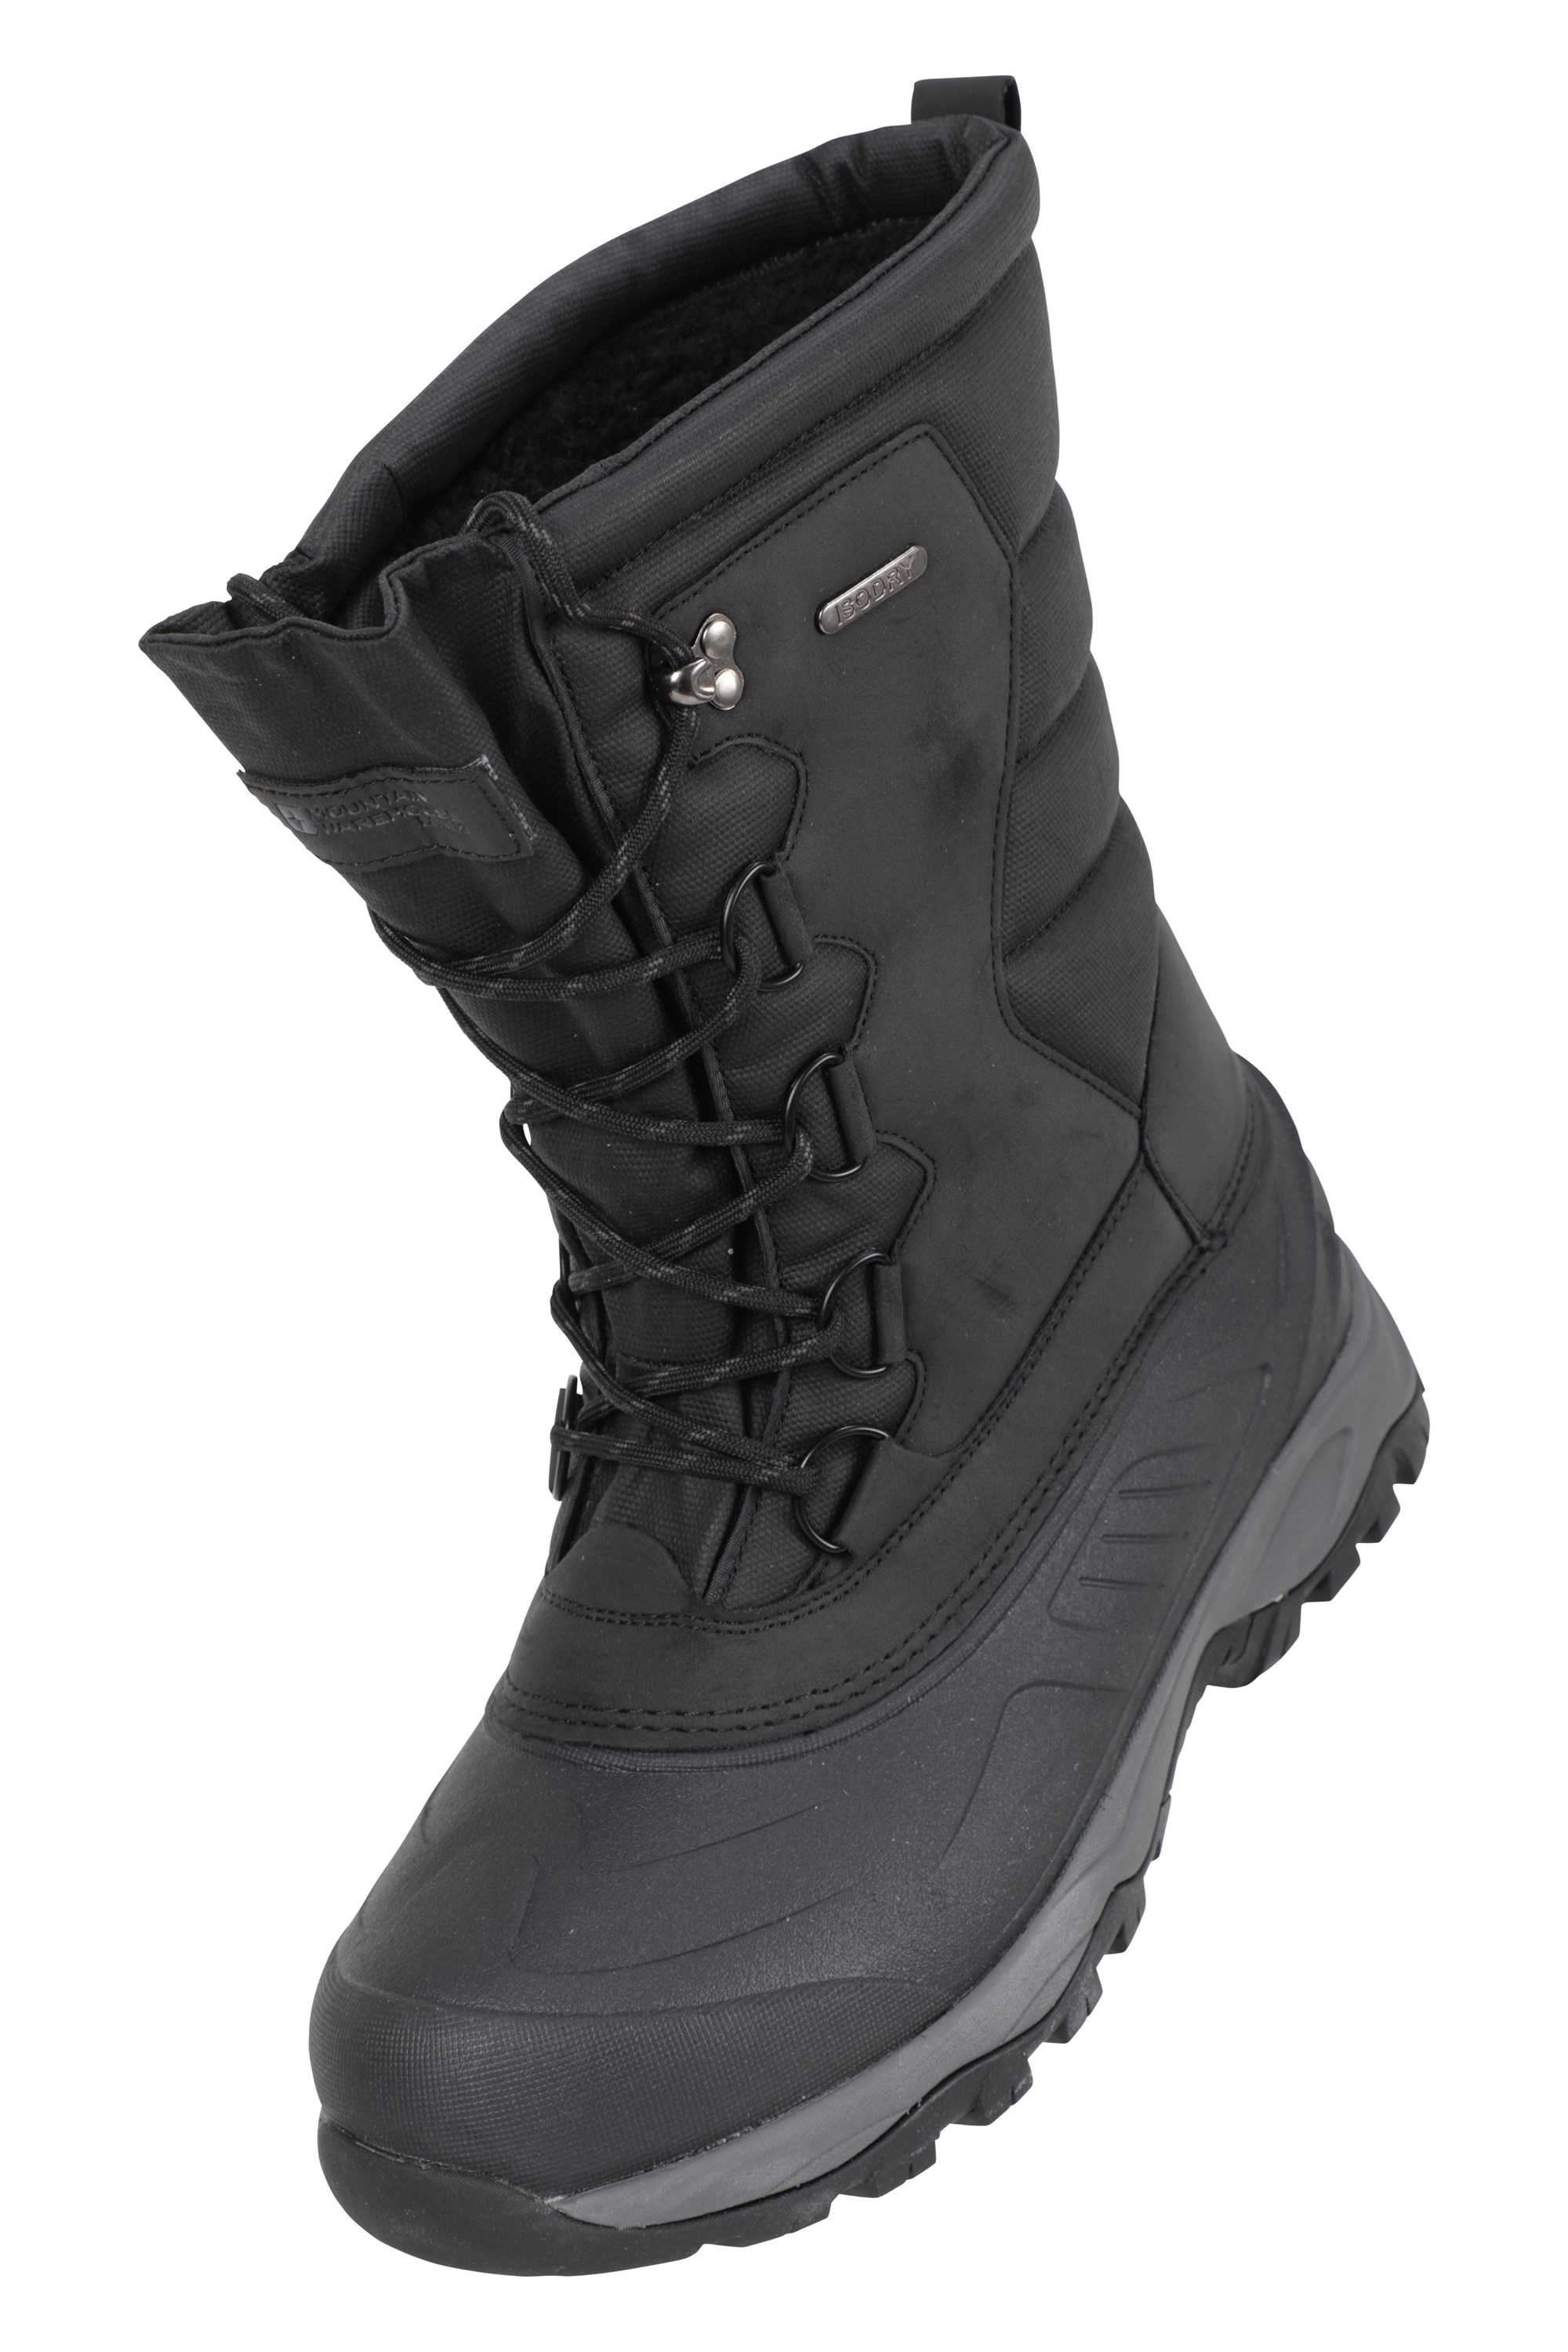 Nevis Extreme Mens Snow Boots | Mountain Warehouse CA